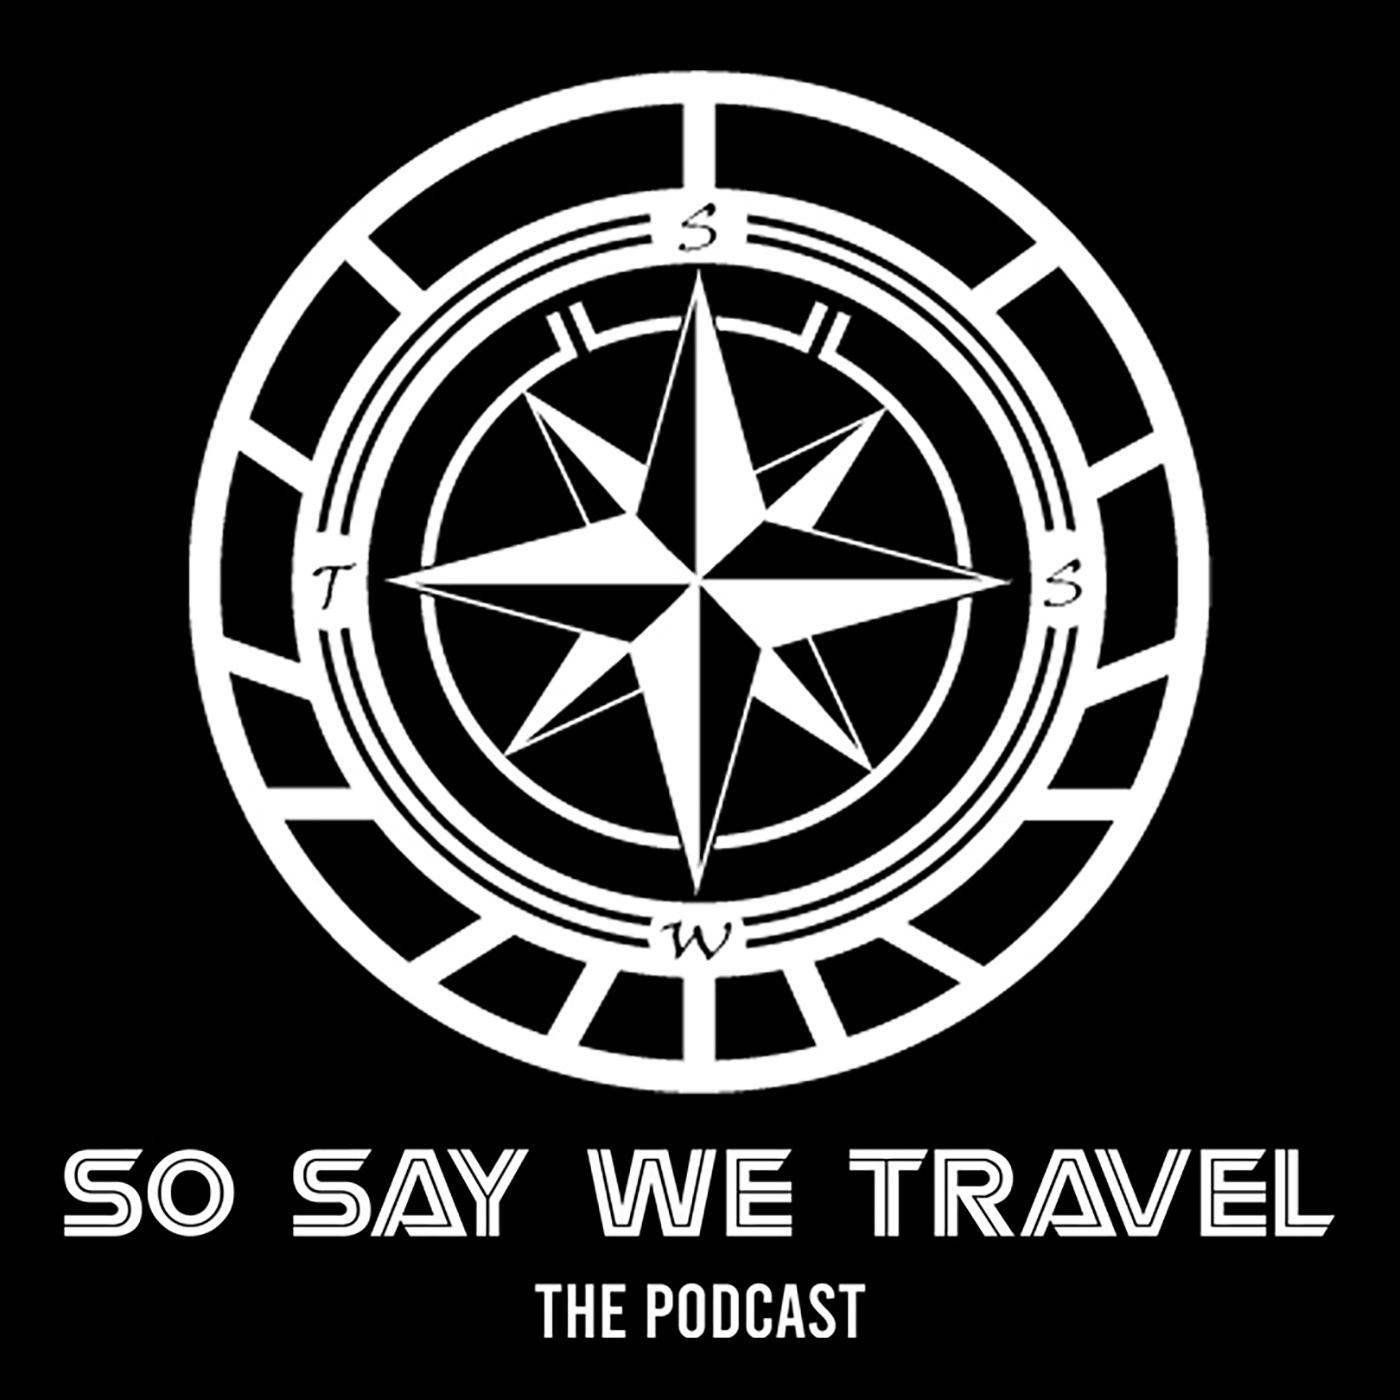 So Say We Travel: The Podcast